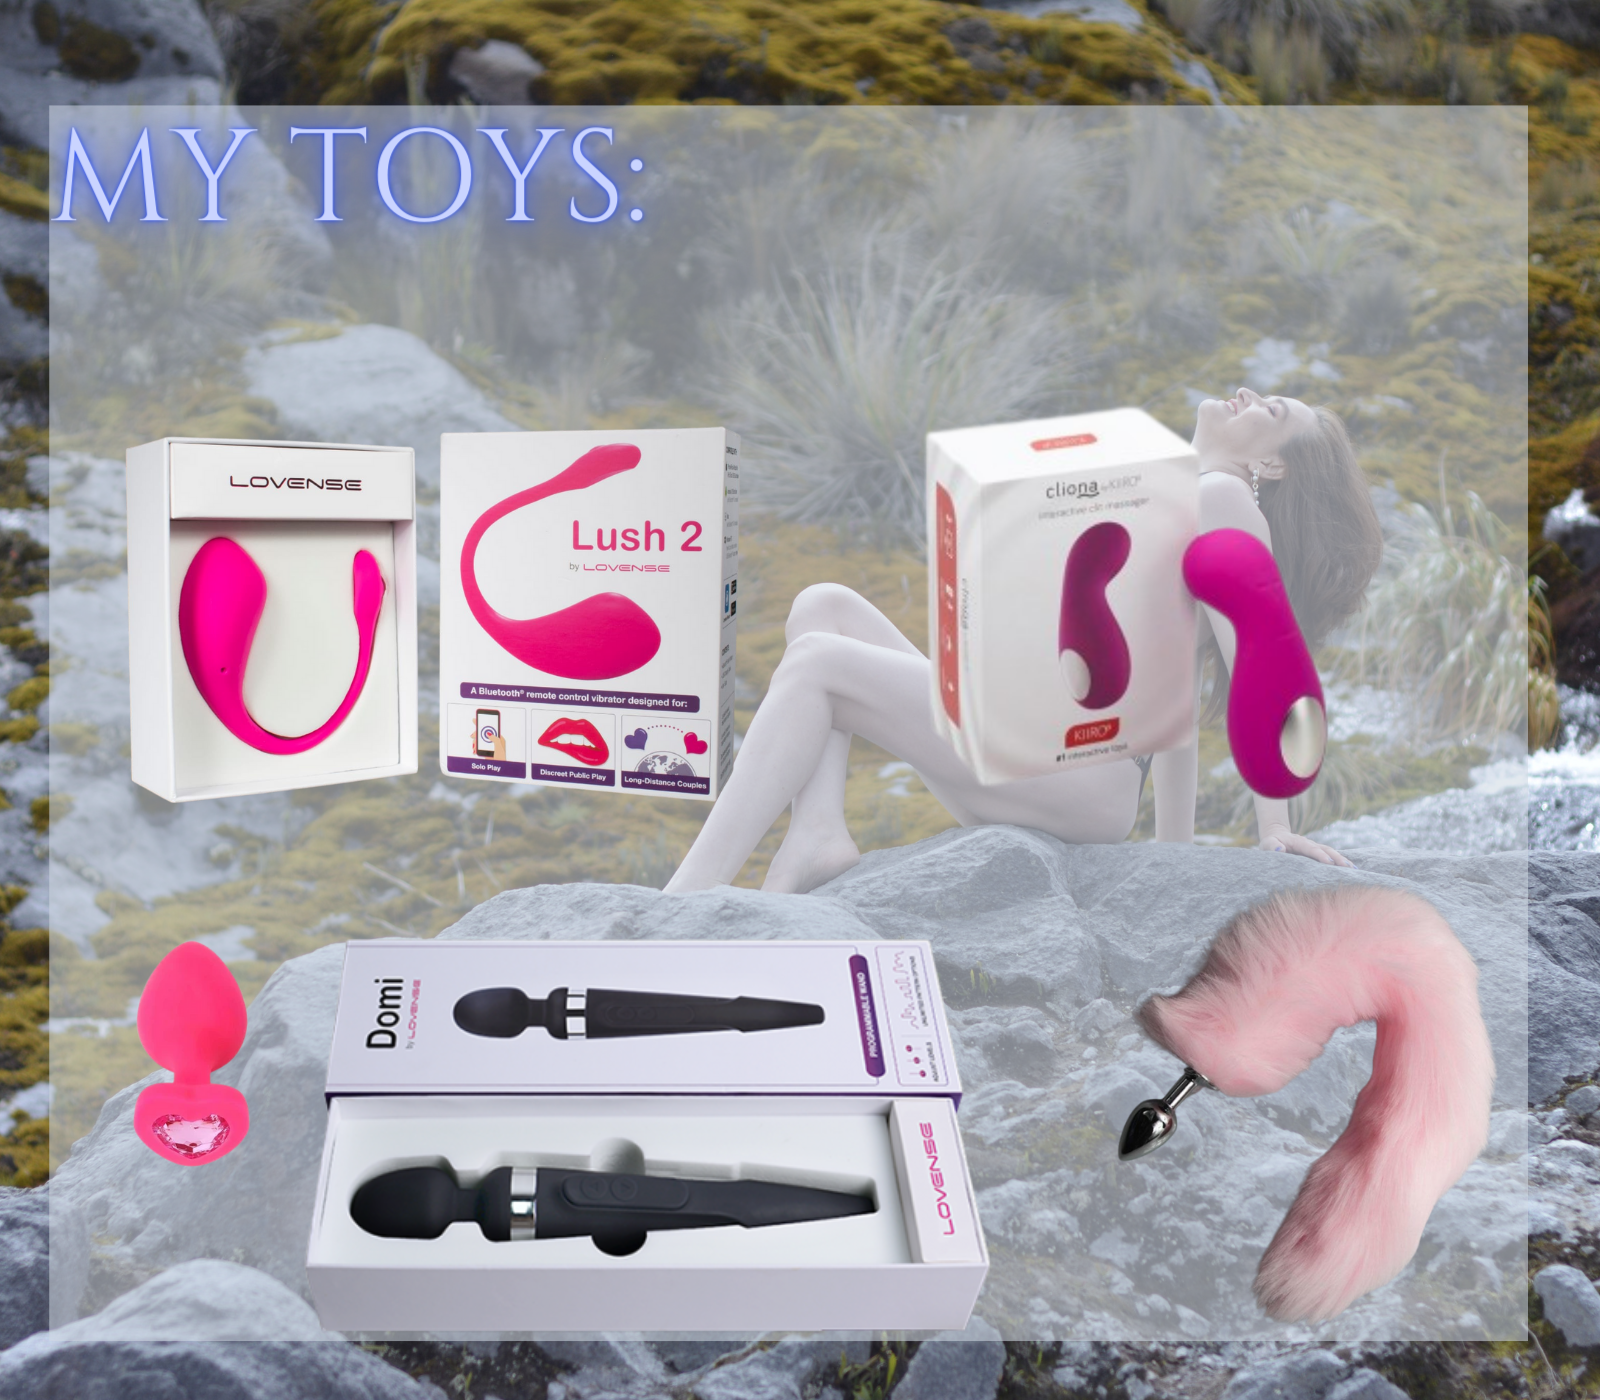 AmeliaCampell Toys image: 1